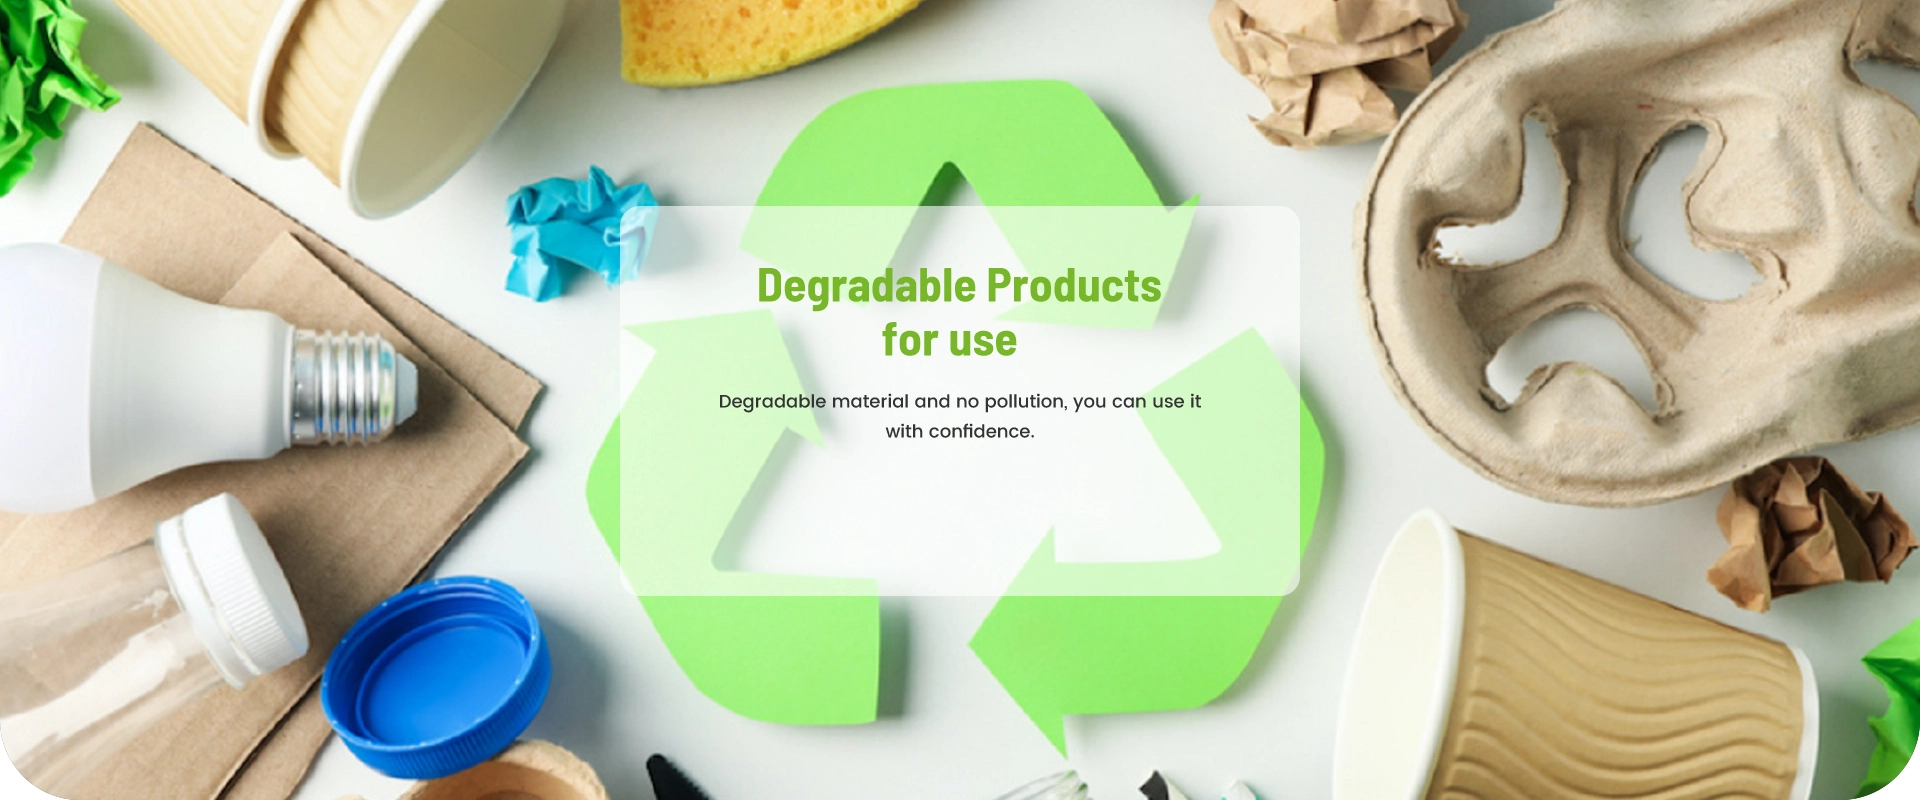 degradable product for use